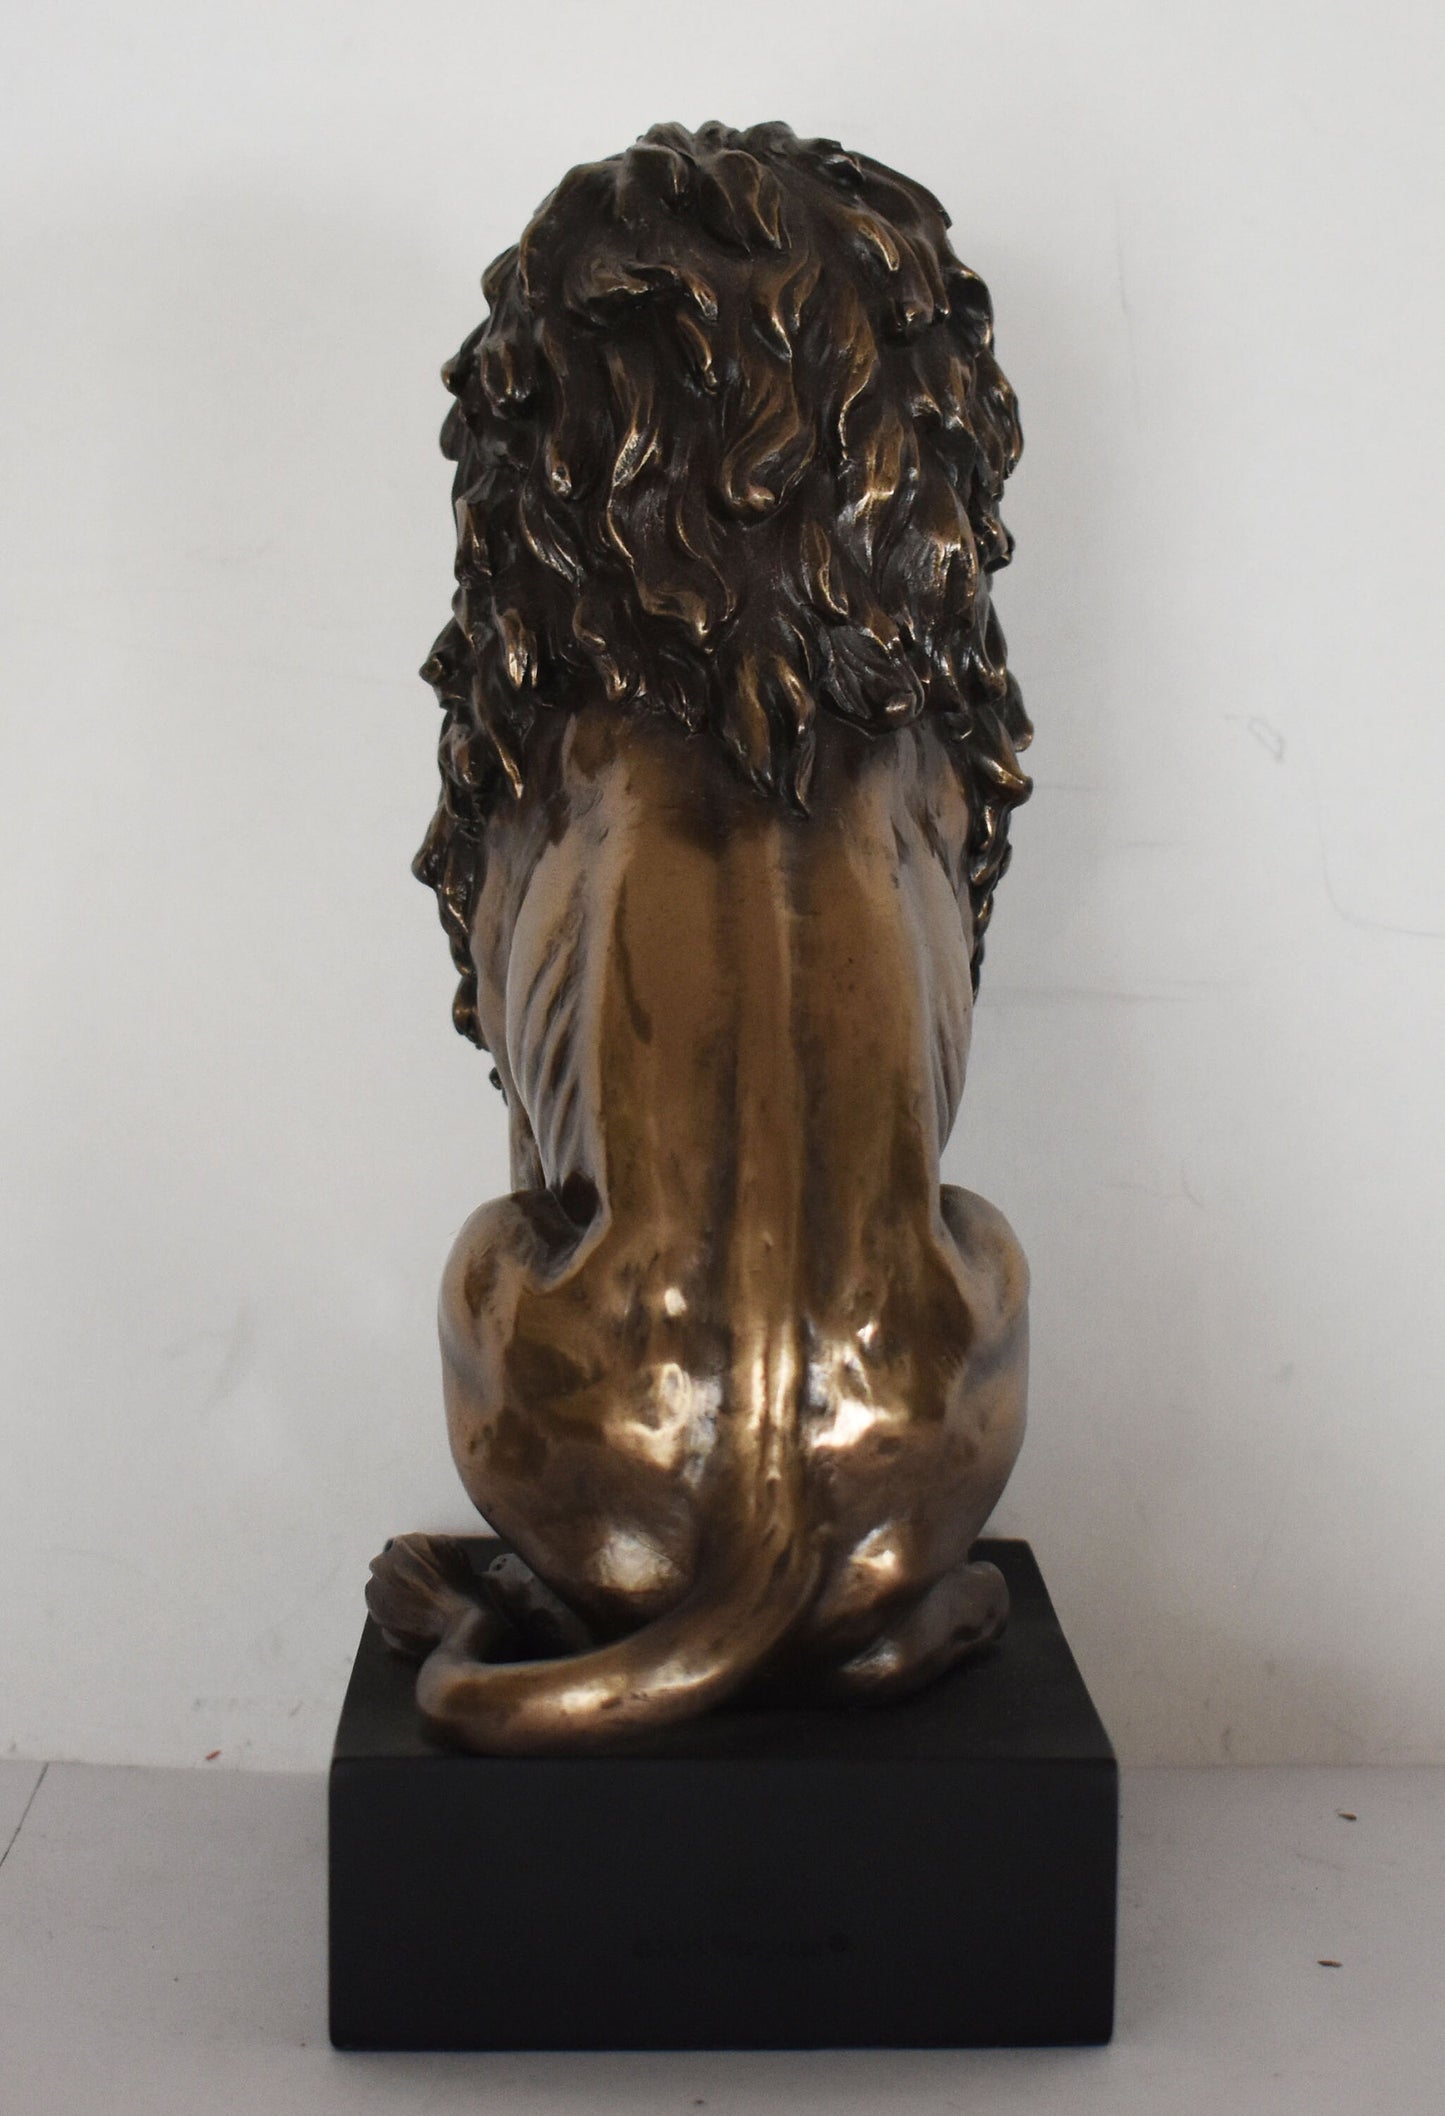 Nemean lion - Hercules' First Labor - Legendary Creature - Offspring of Orthrus and the Chimera - Cold Cast Bronze Resin